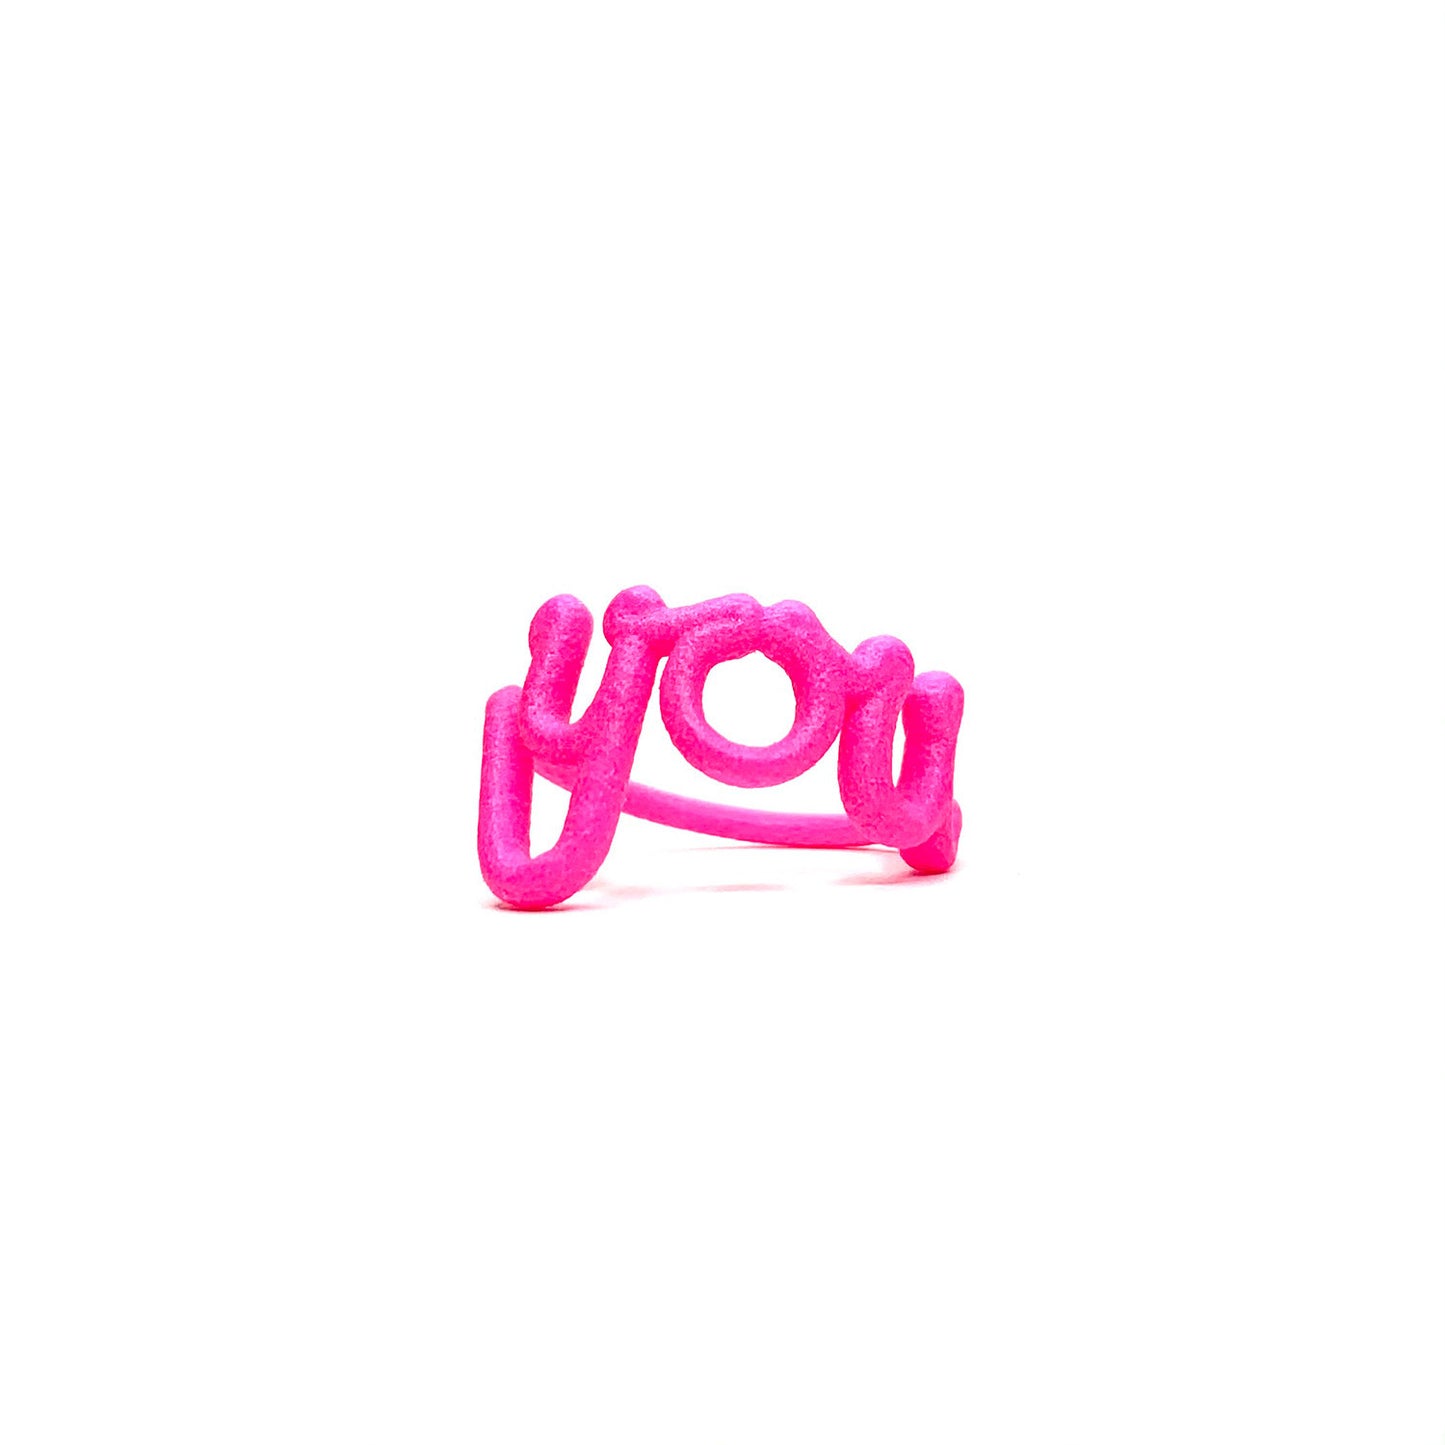 Zoe sherwood The Original This Is ‘You’ Statement Ring neon pink